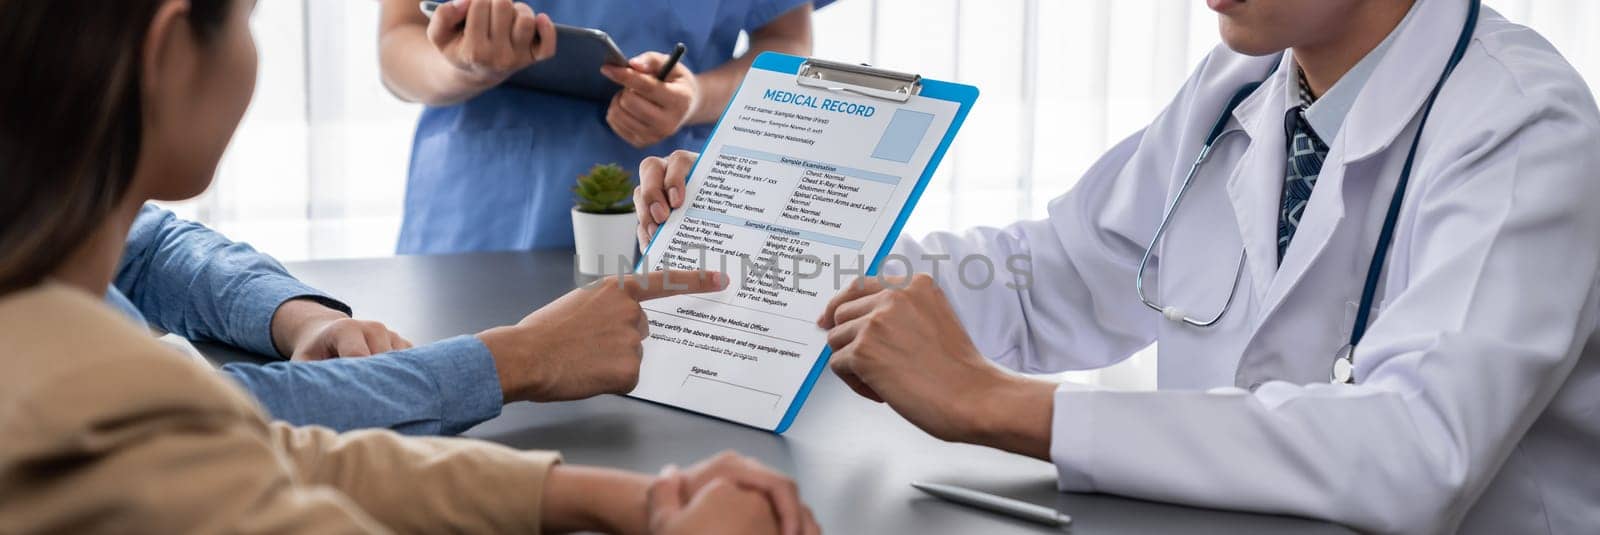 Doctor show medical diagnosis report and providing compassionate healthcare consultation to young couple patient in doctor clinic office. Doctor appointment and medical consult concept. Neoteric